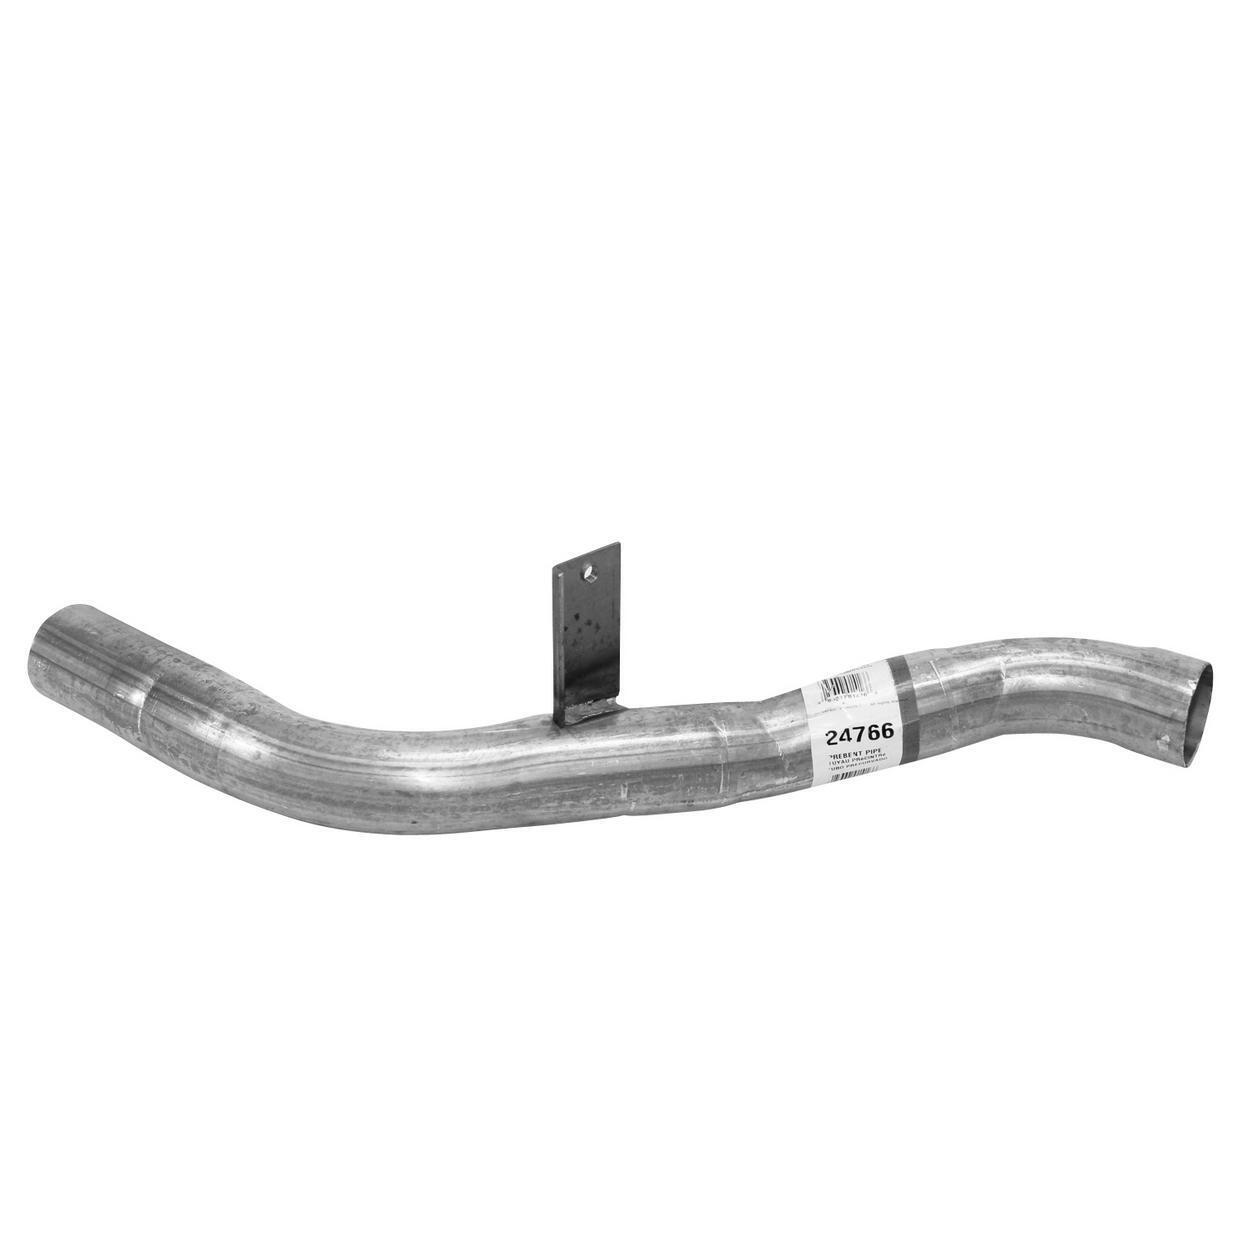 N/A Exhaust Tail Pipe Fits 1991-1993 Oldsmobile Cutlass Ciera 3.3L V6 GAS OHV